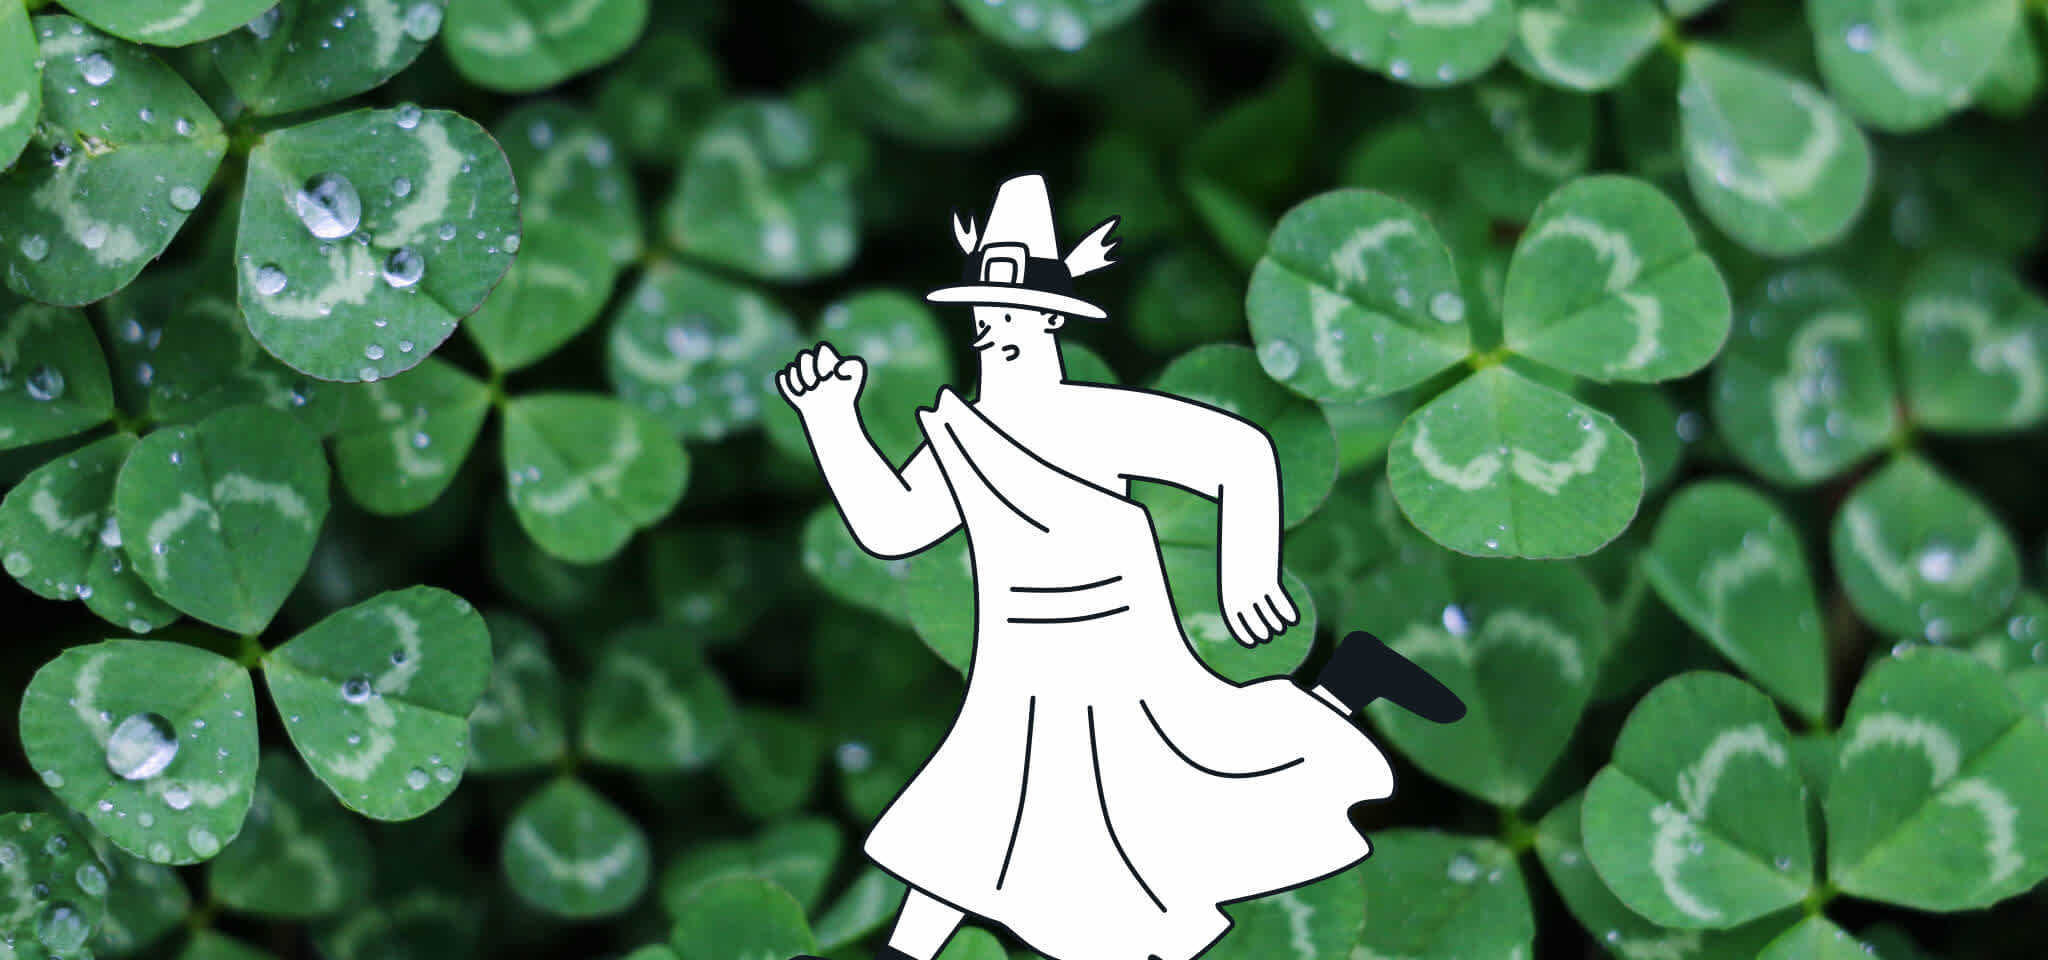 Hermes is running in front of a field of clovers